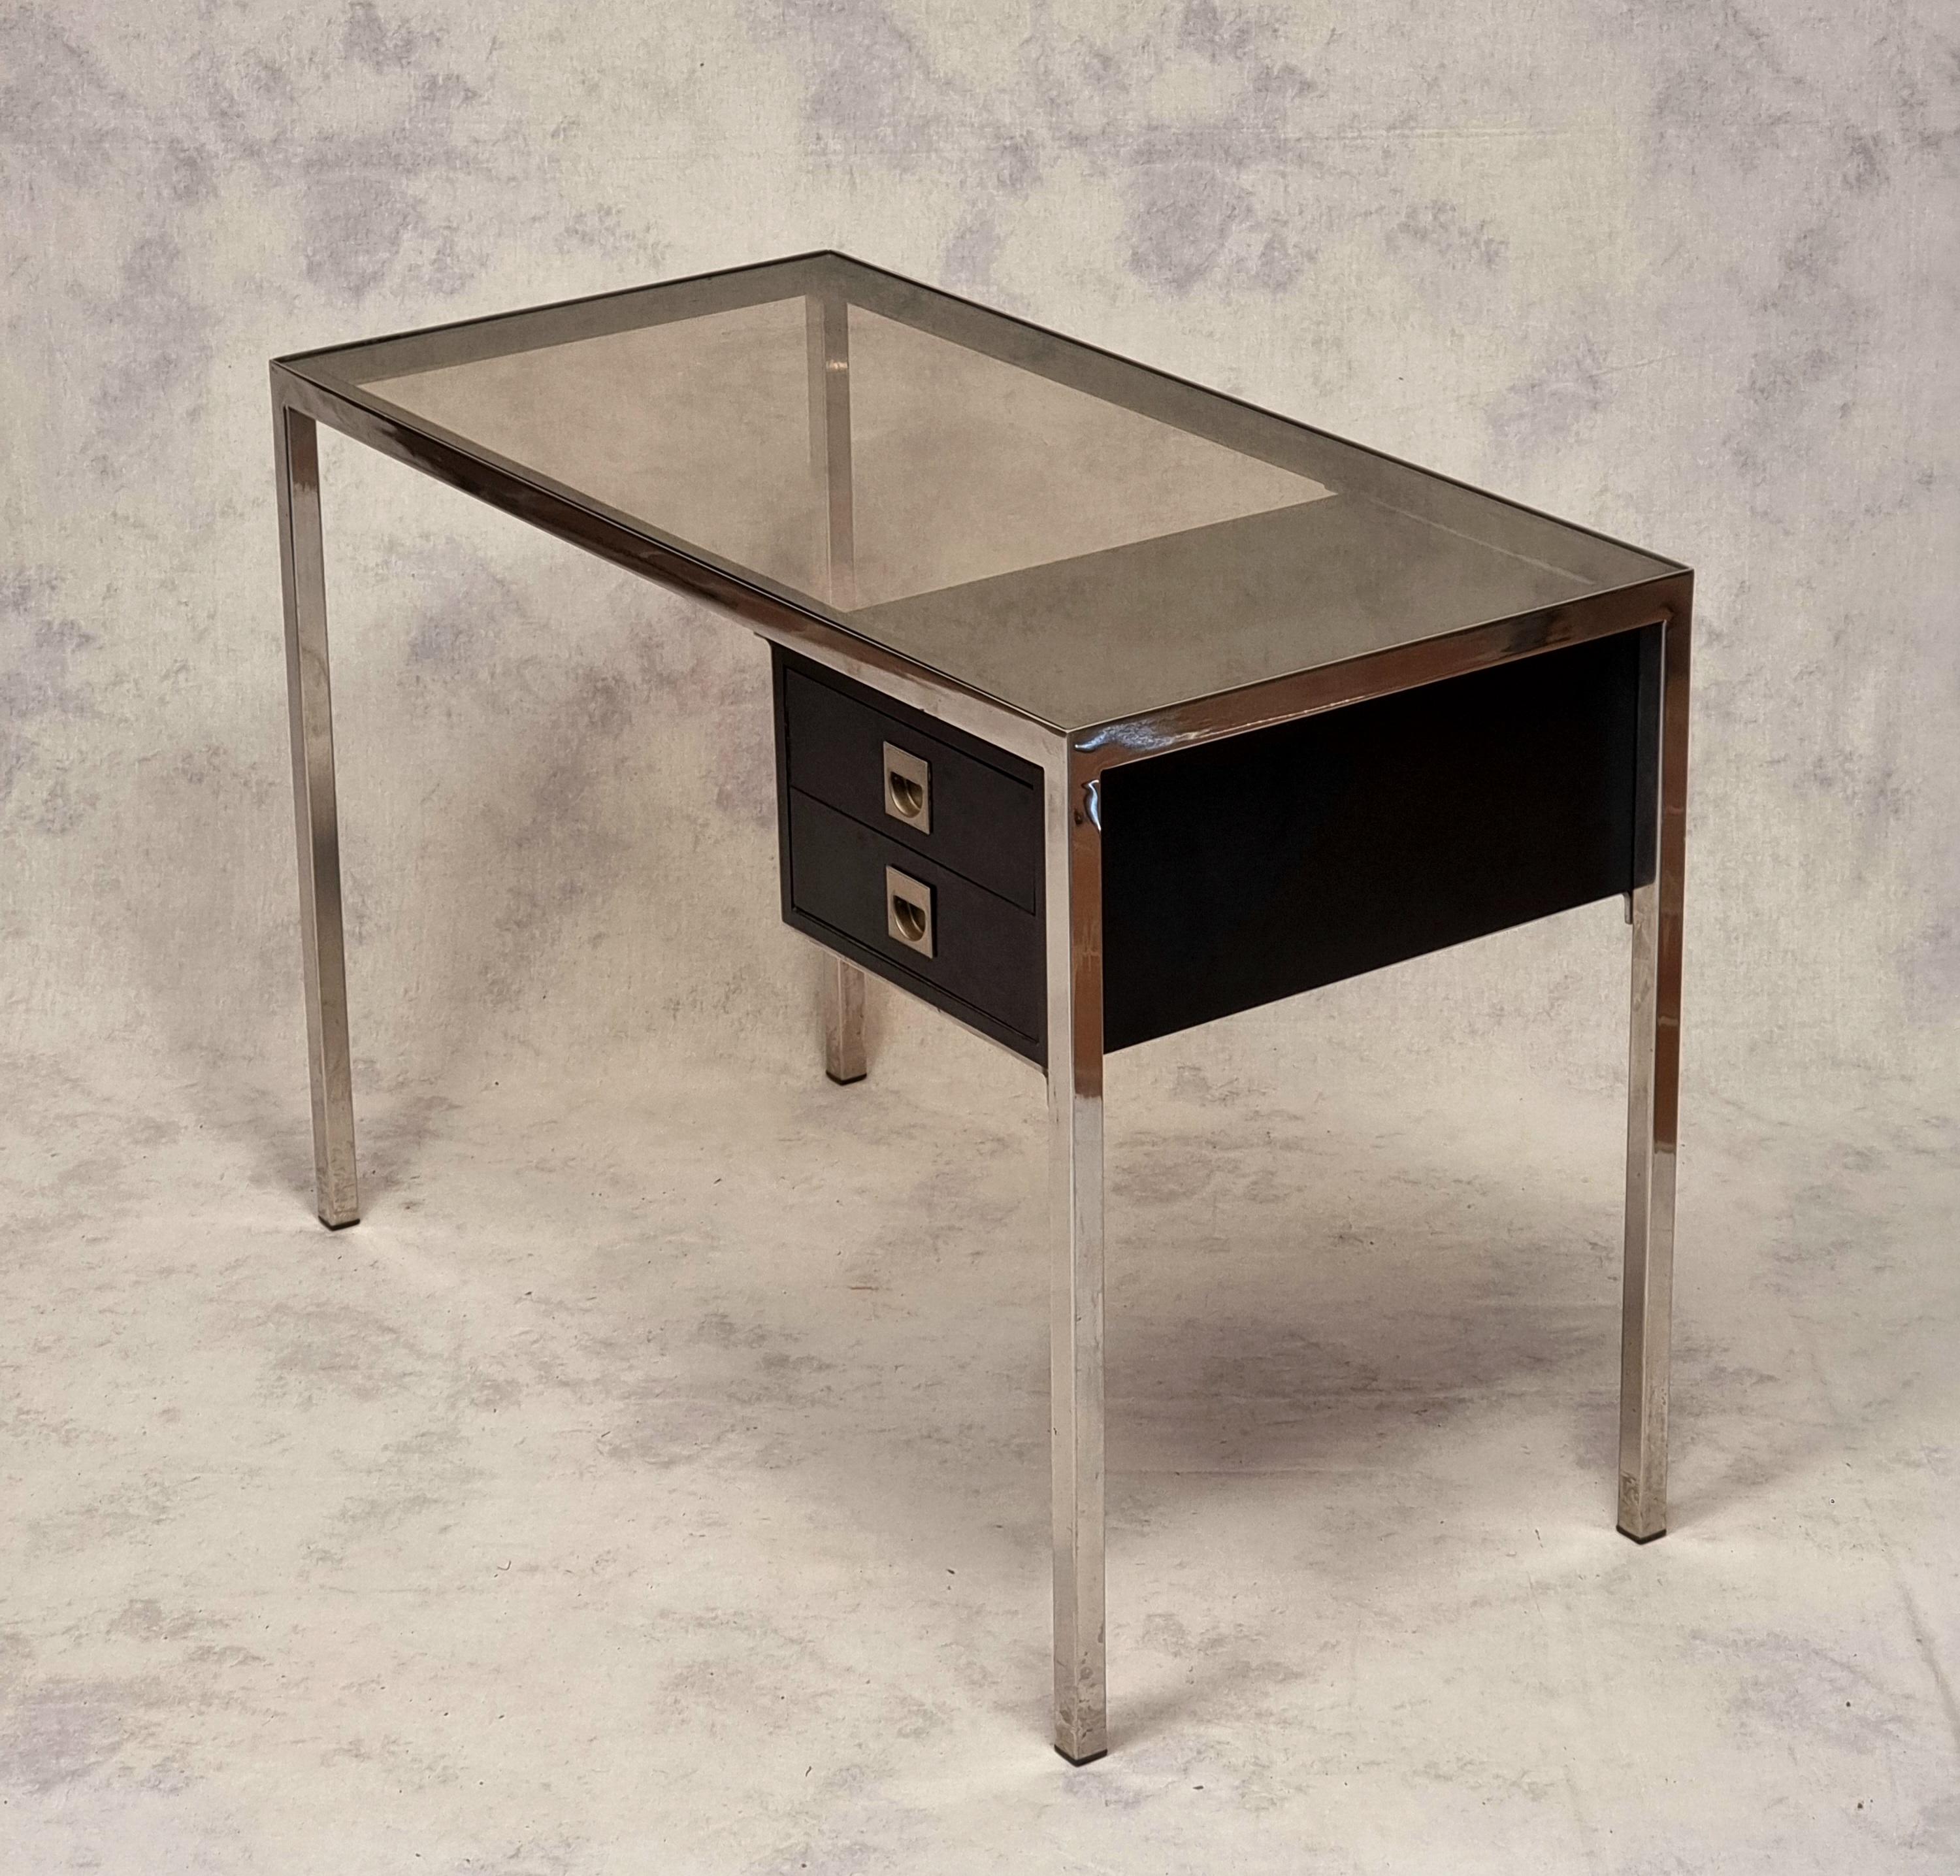 Elegant desk by Guy Lefèvre dating from the 1970s. Its chrome metal structure and black lacquered wooden box are typical of the French style of the 1970s. Just like Maison Jansen, Romeo or Jean Claude Mahey, Guy Lefevre is a name reference in chic